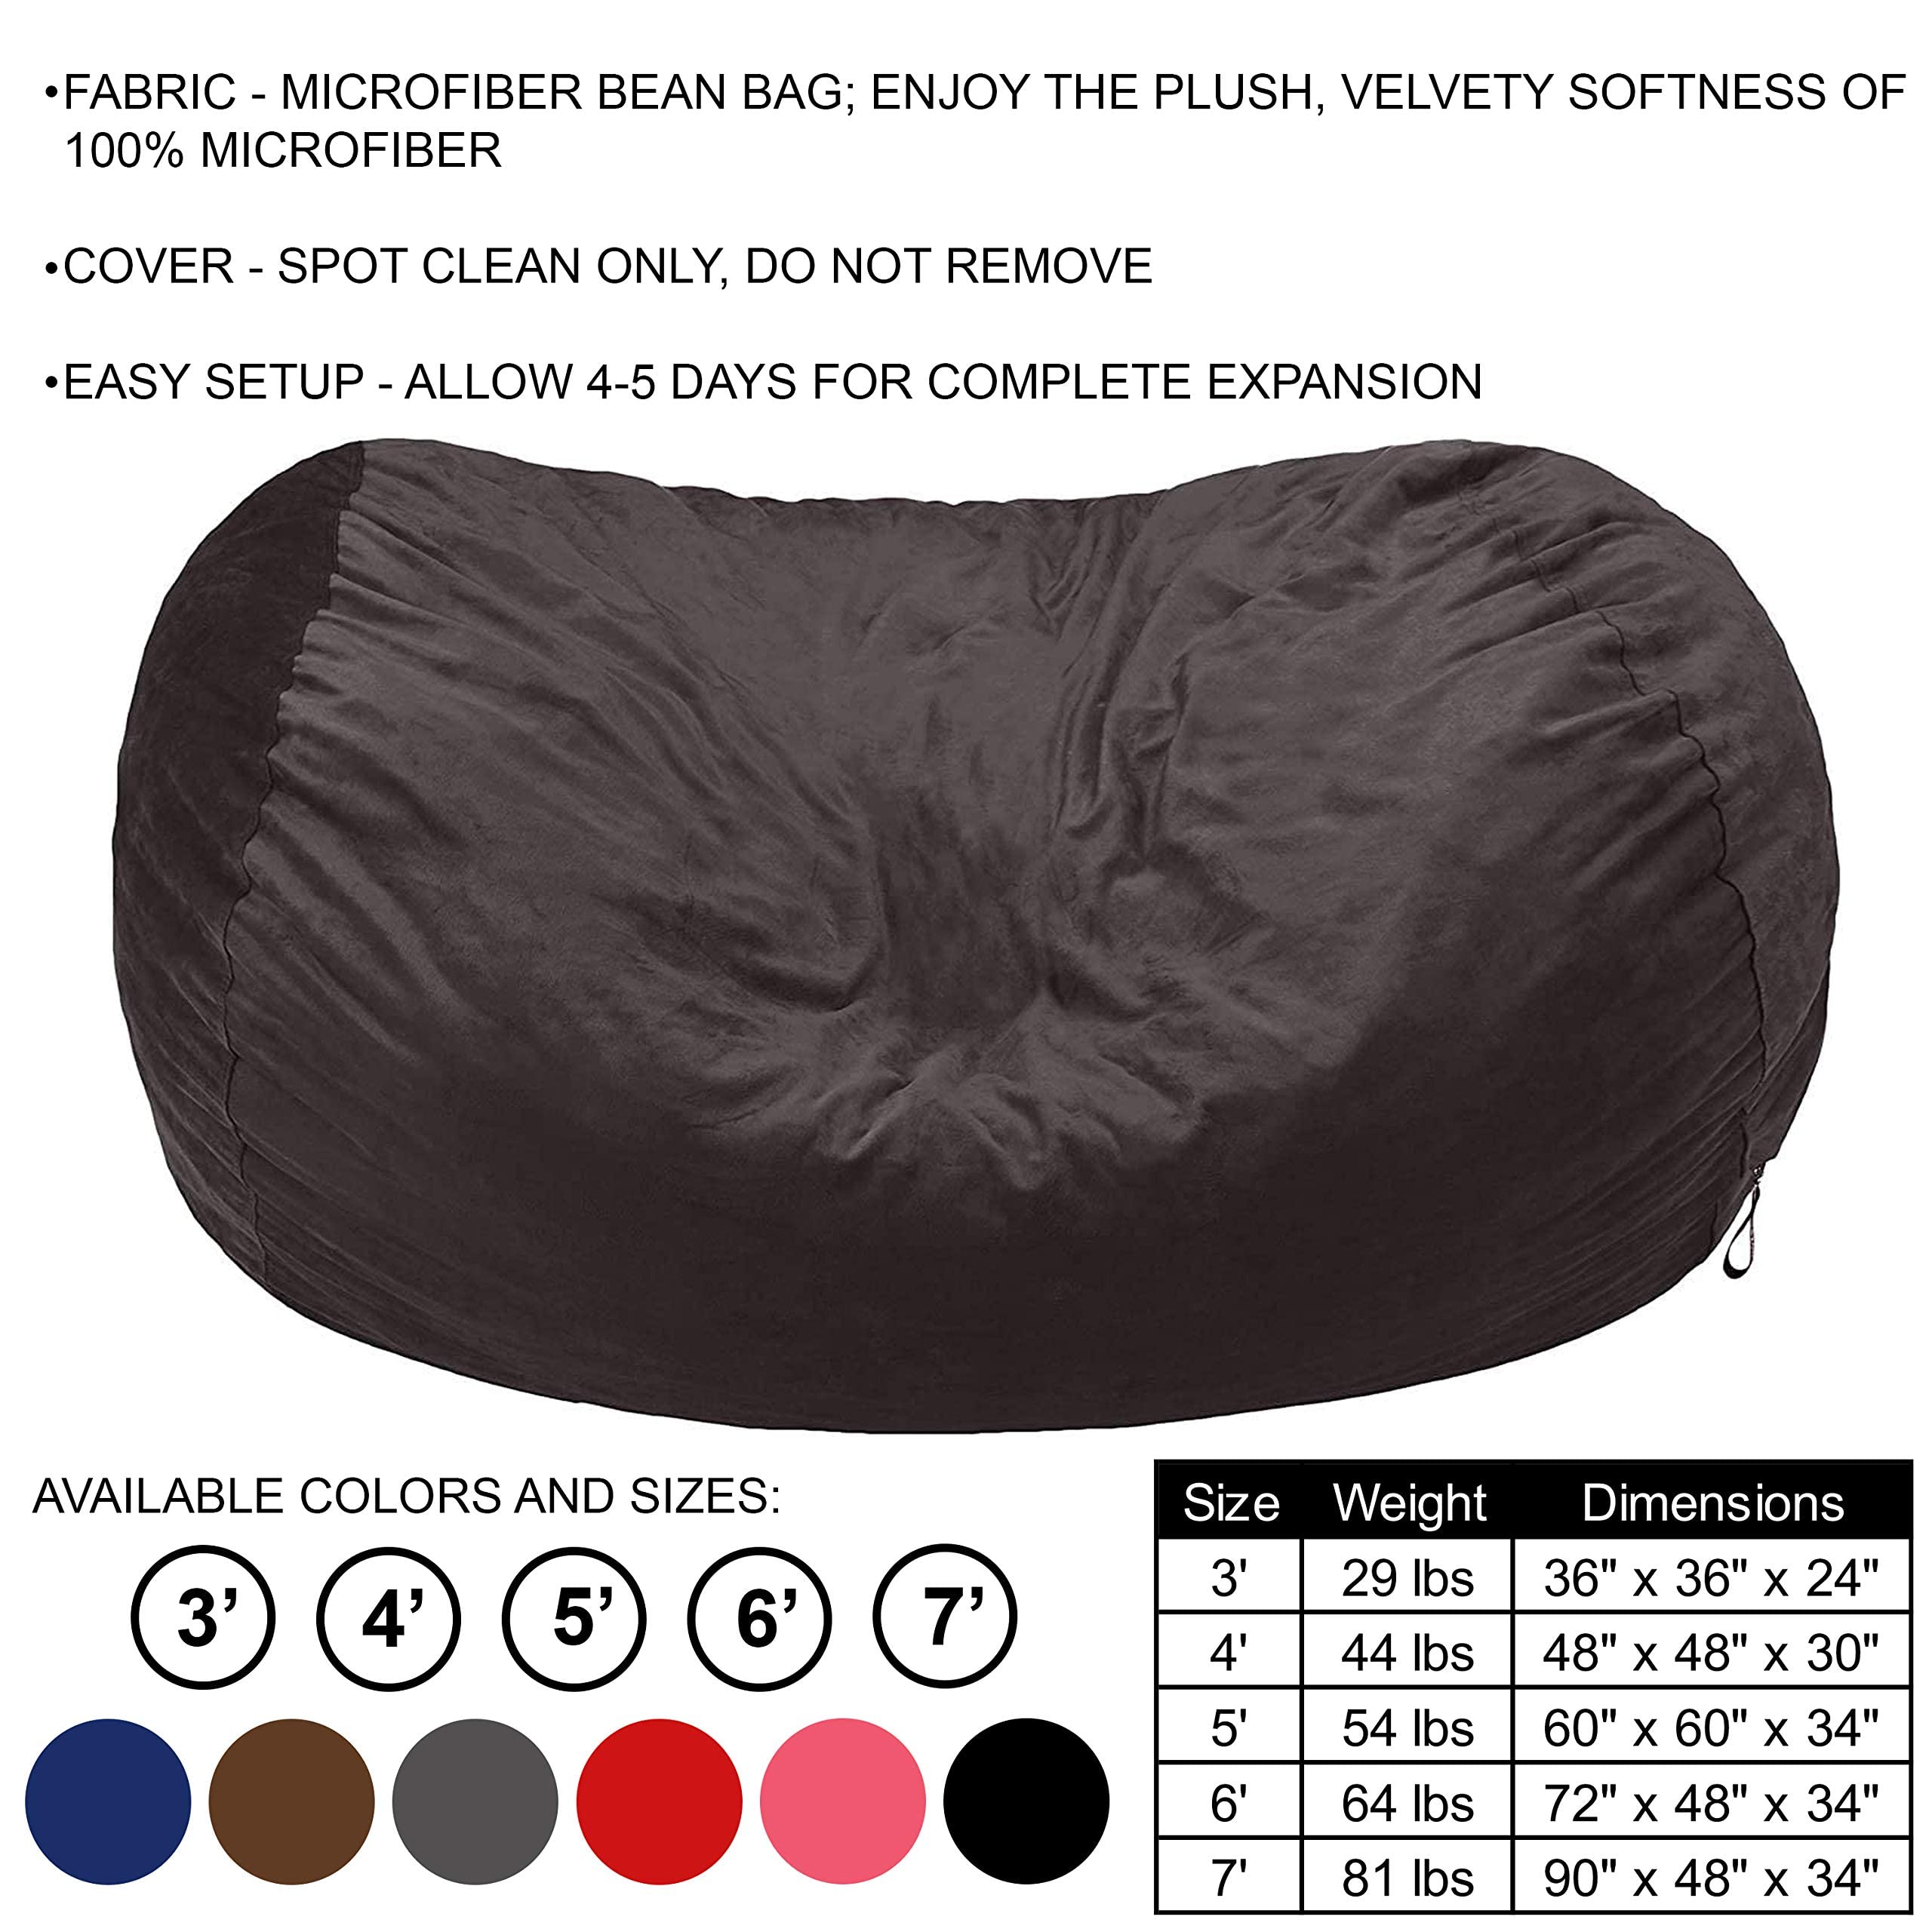 Amazon Basics Memory Foam Filled Bean Bag Lounger with Microfiber Cover, 6 ft, Grey, Solid